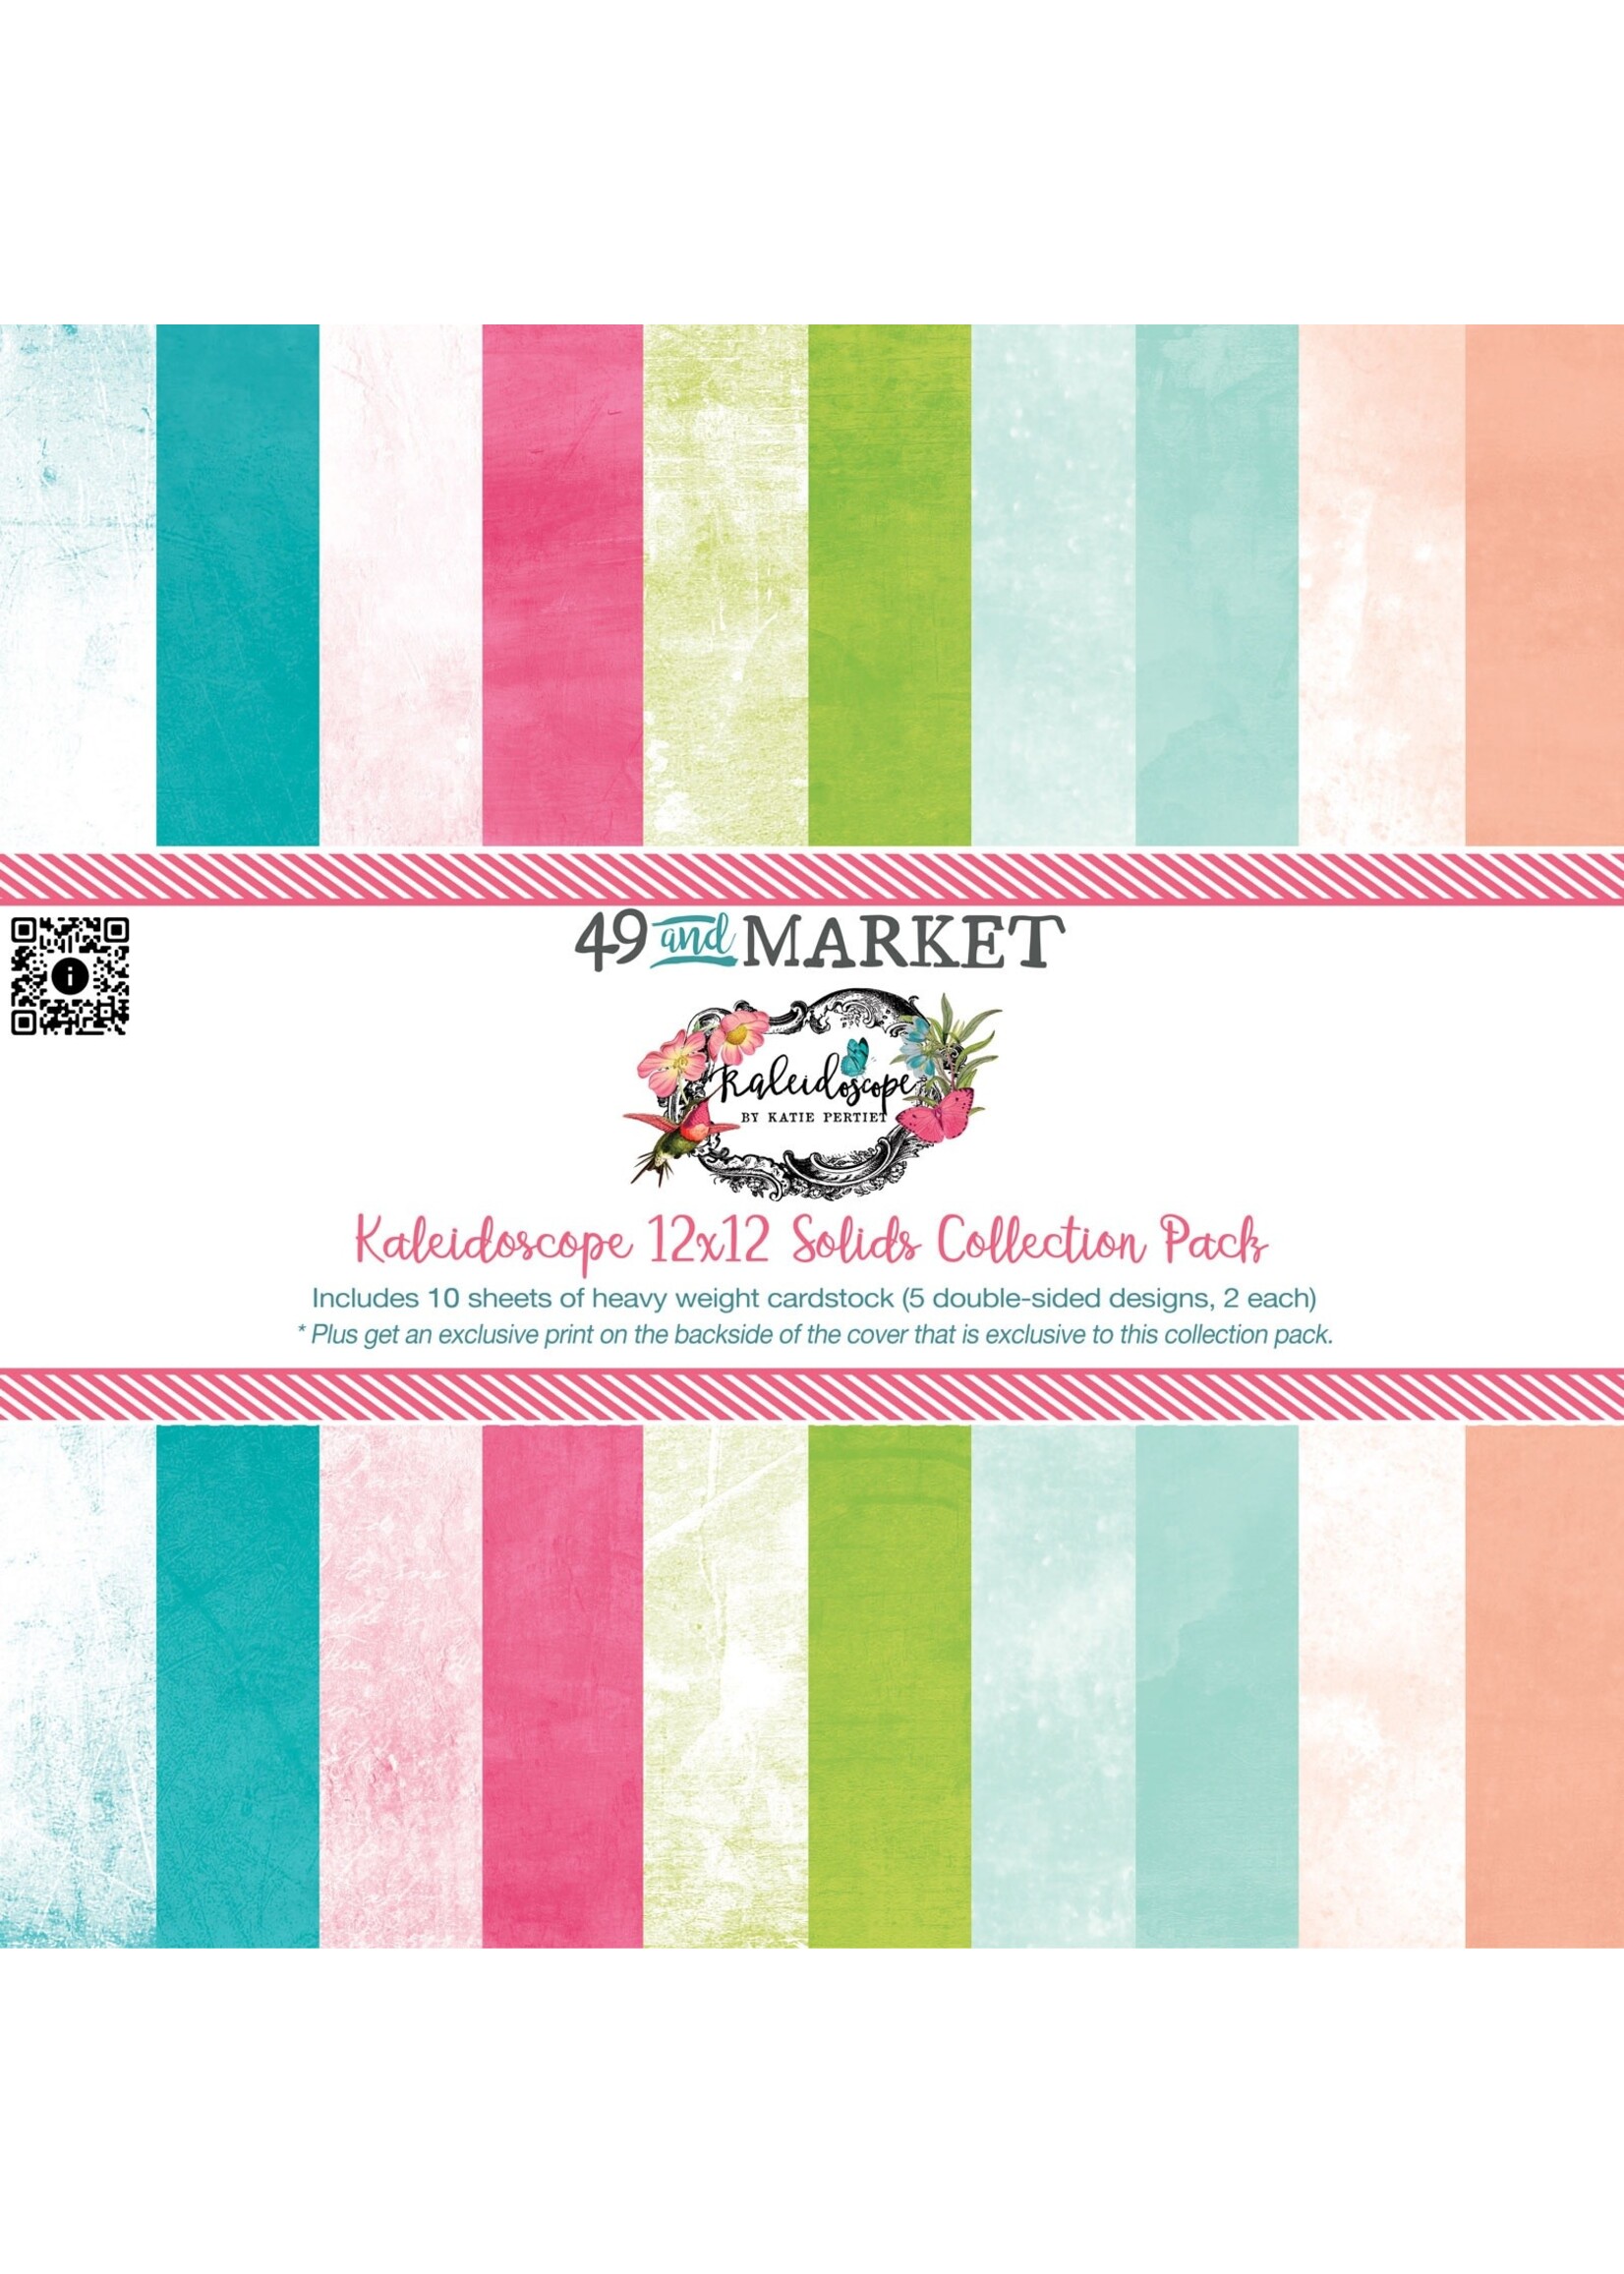 49 and Market 49 And Market Collection Pack 12"X12": Kaleidoscope Solids